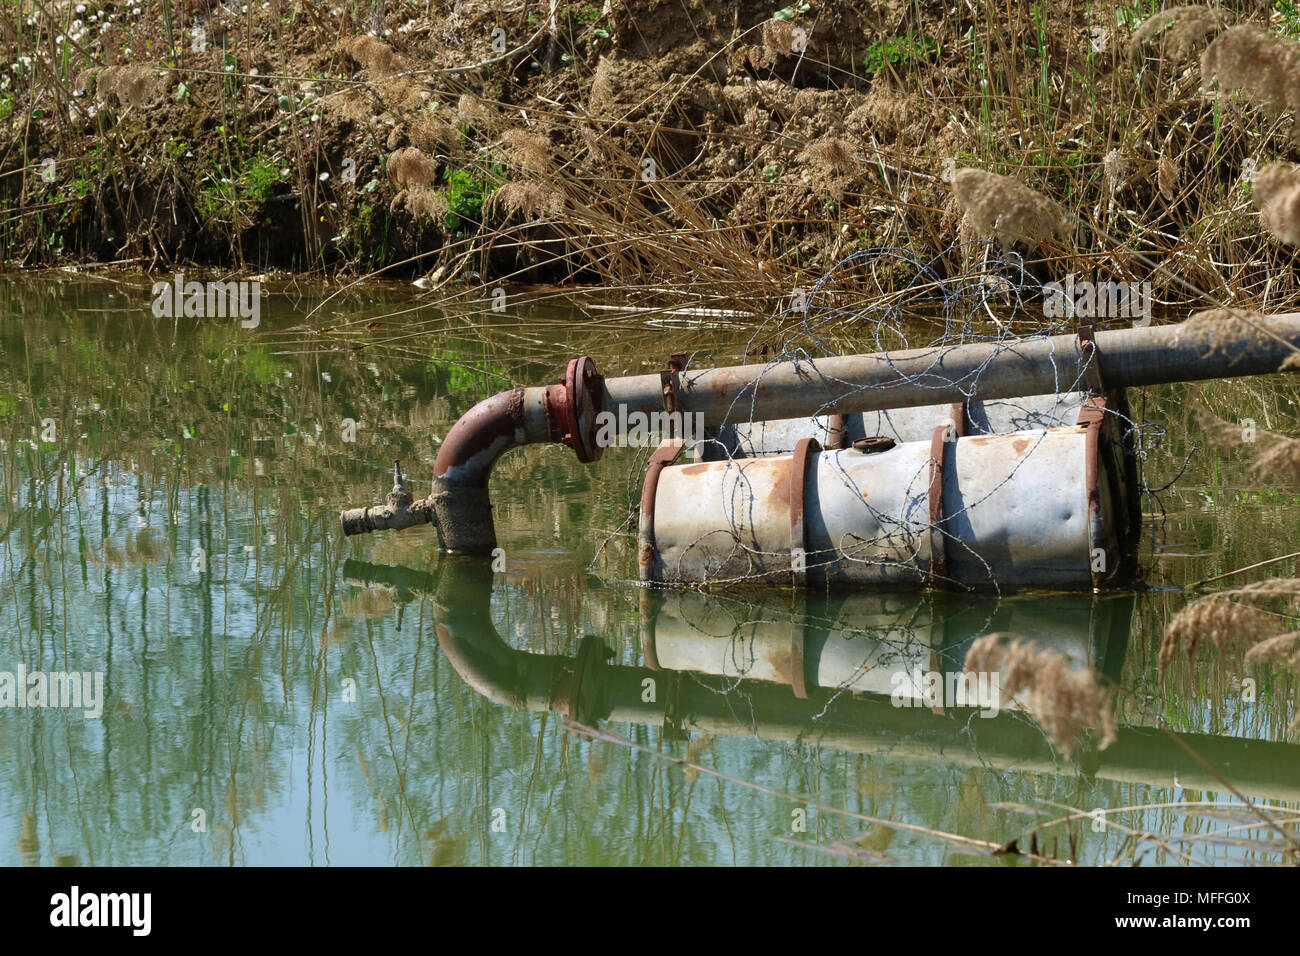 sewage pipe in the lake on floating barrels Stock Photo